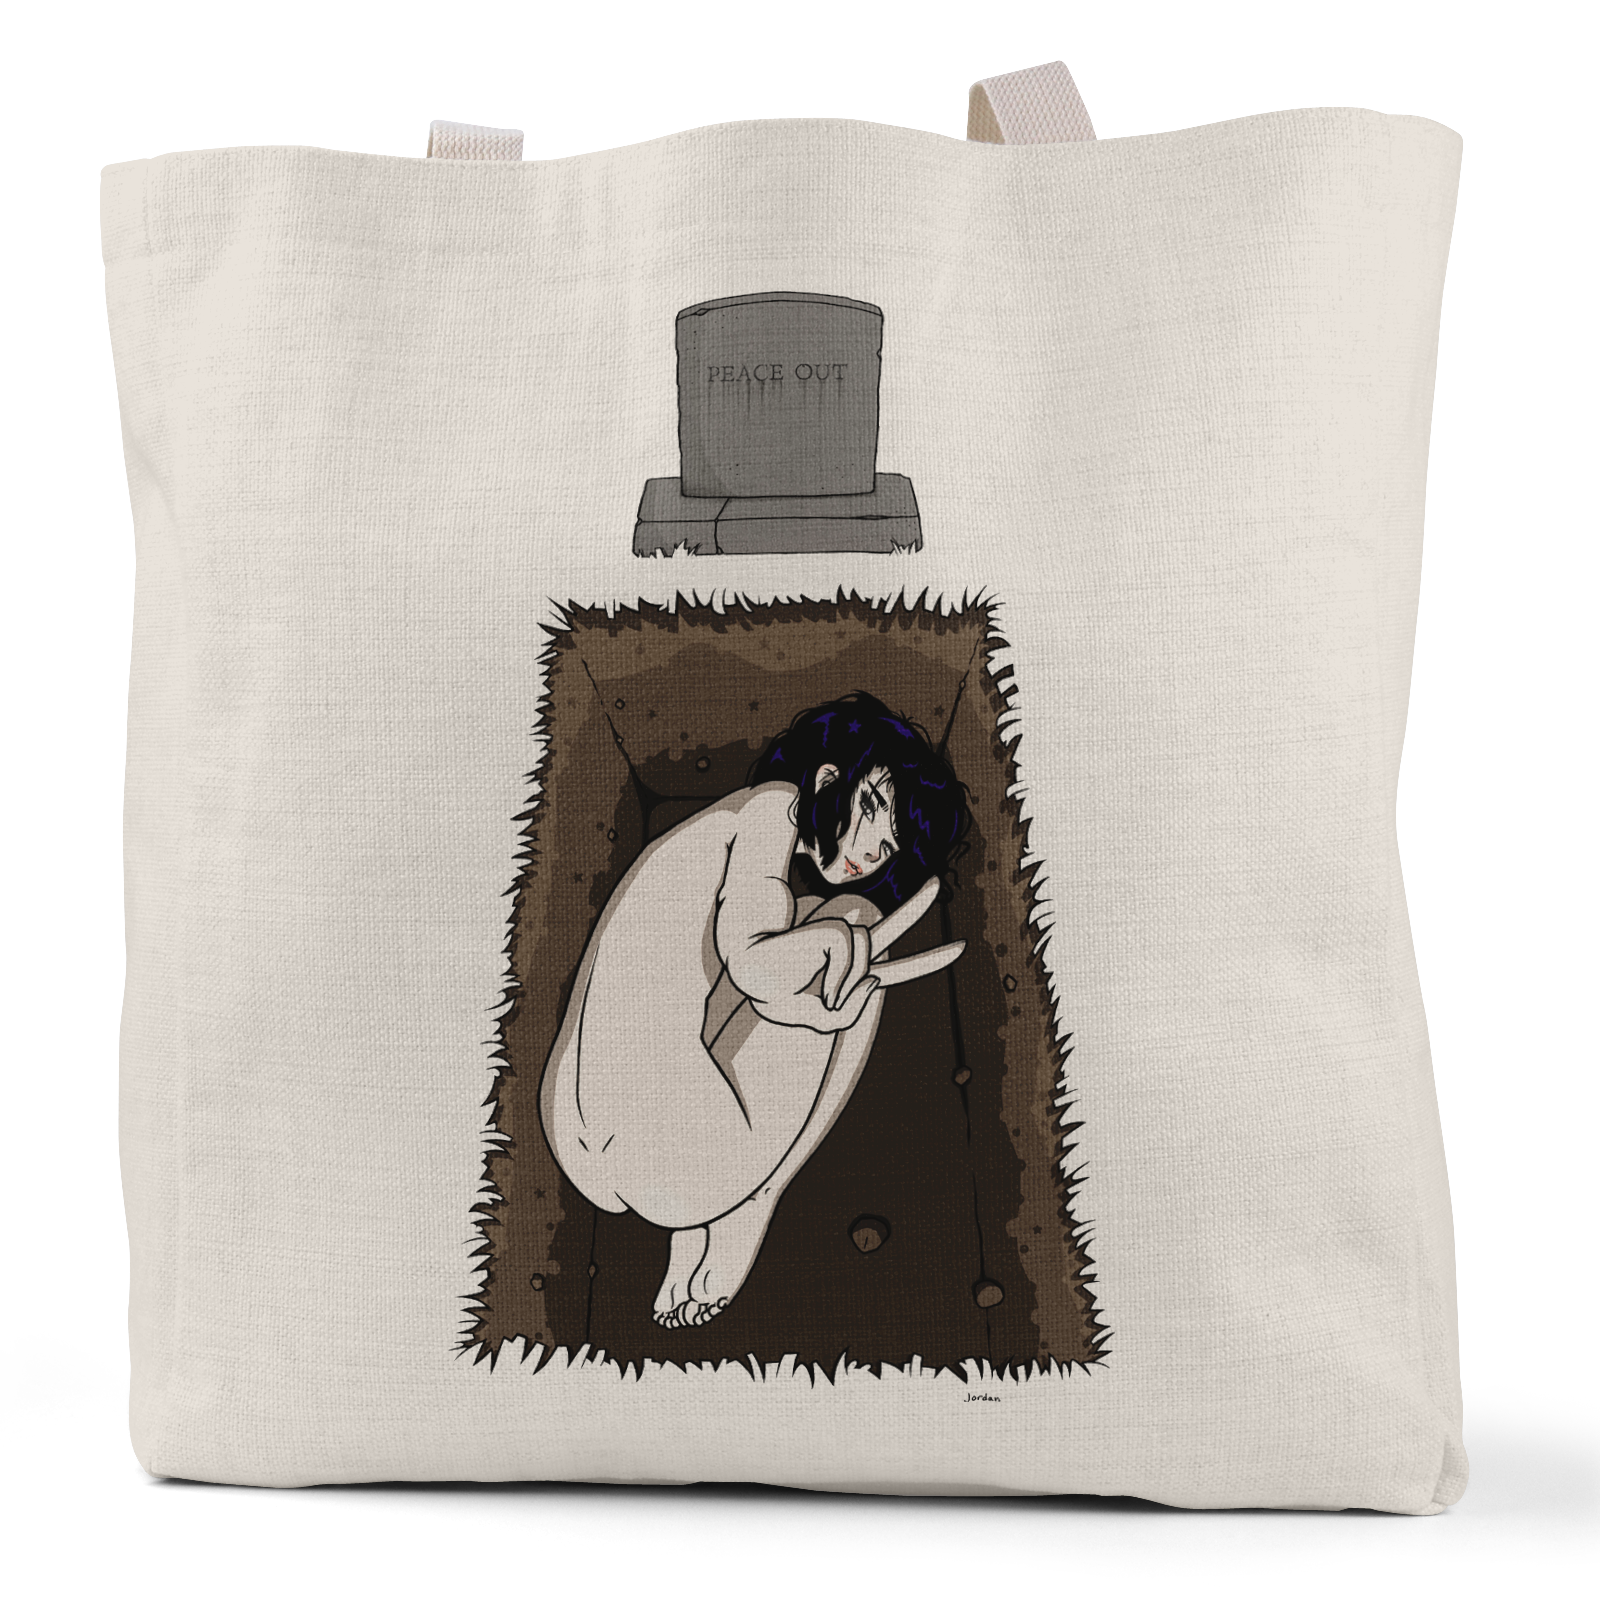 "Rest in Peace Out" - Small/Large Linen Tote